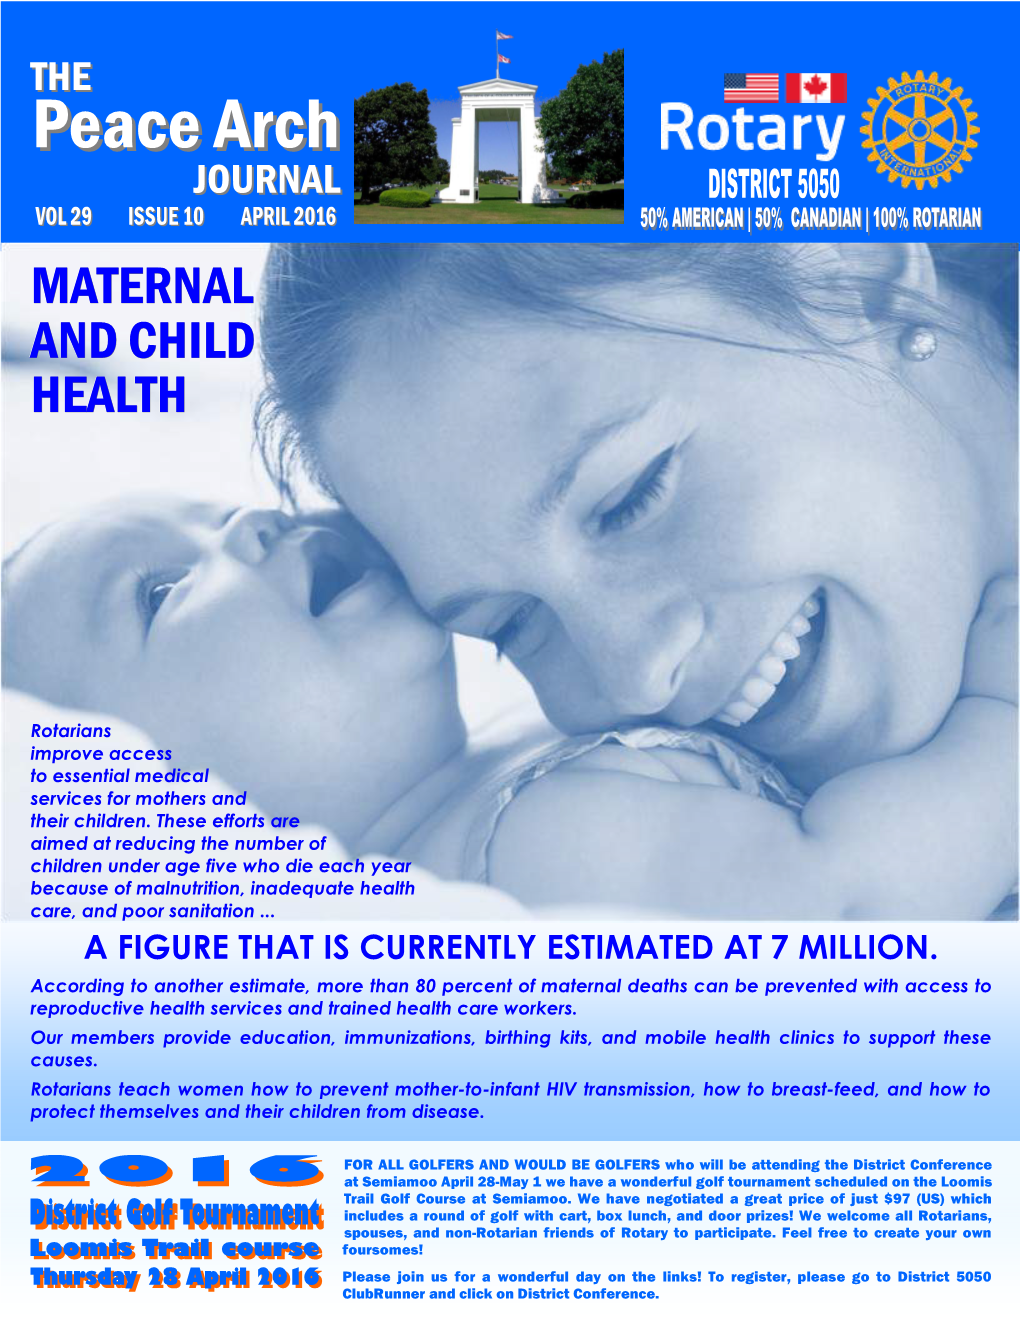 THE PEACE ARCH JOURNAL PAGE 2 Message from Rotary International President K